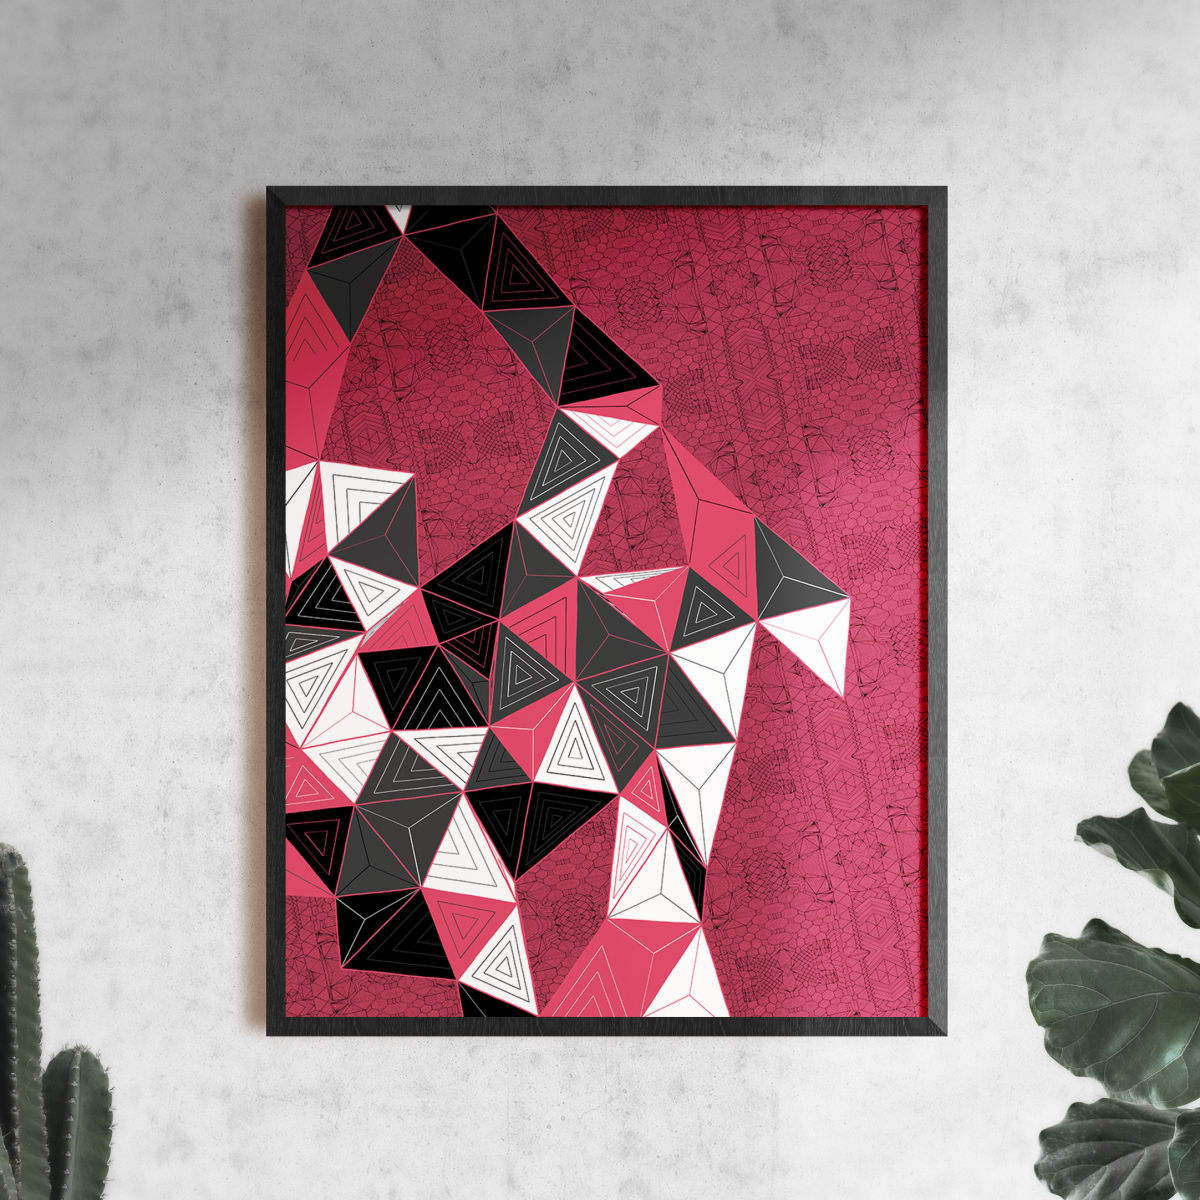 "Conscious Growth 086" Large One-of-a-Kind Print by Debbie Clapper  Image: Conscious Growth Print 086, a pink, black and white one of a kind archival modern art print